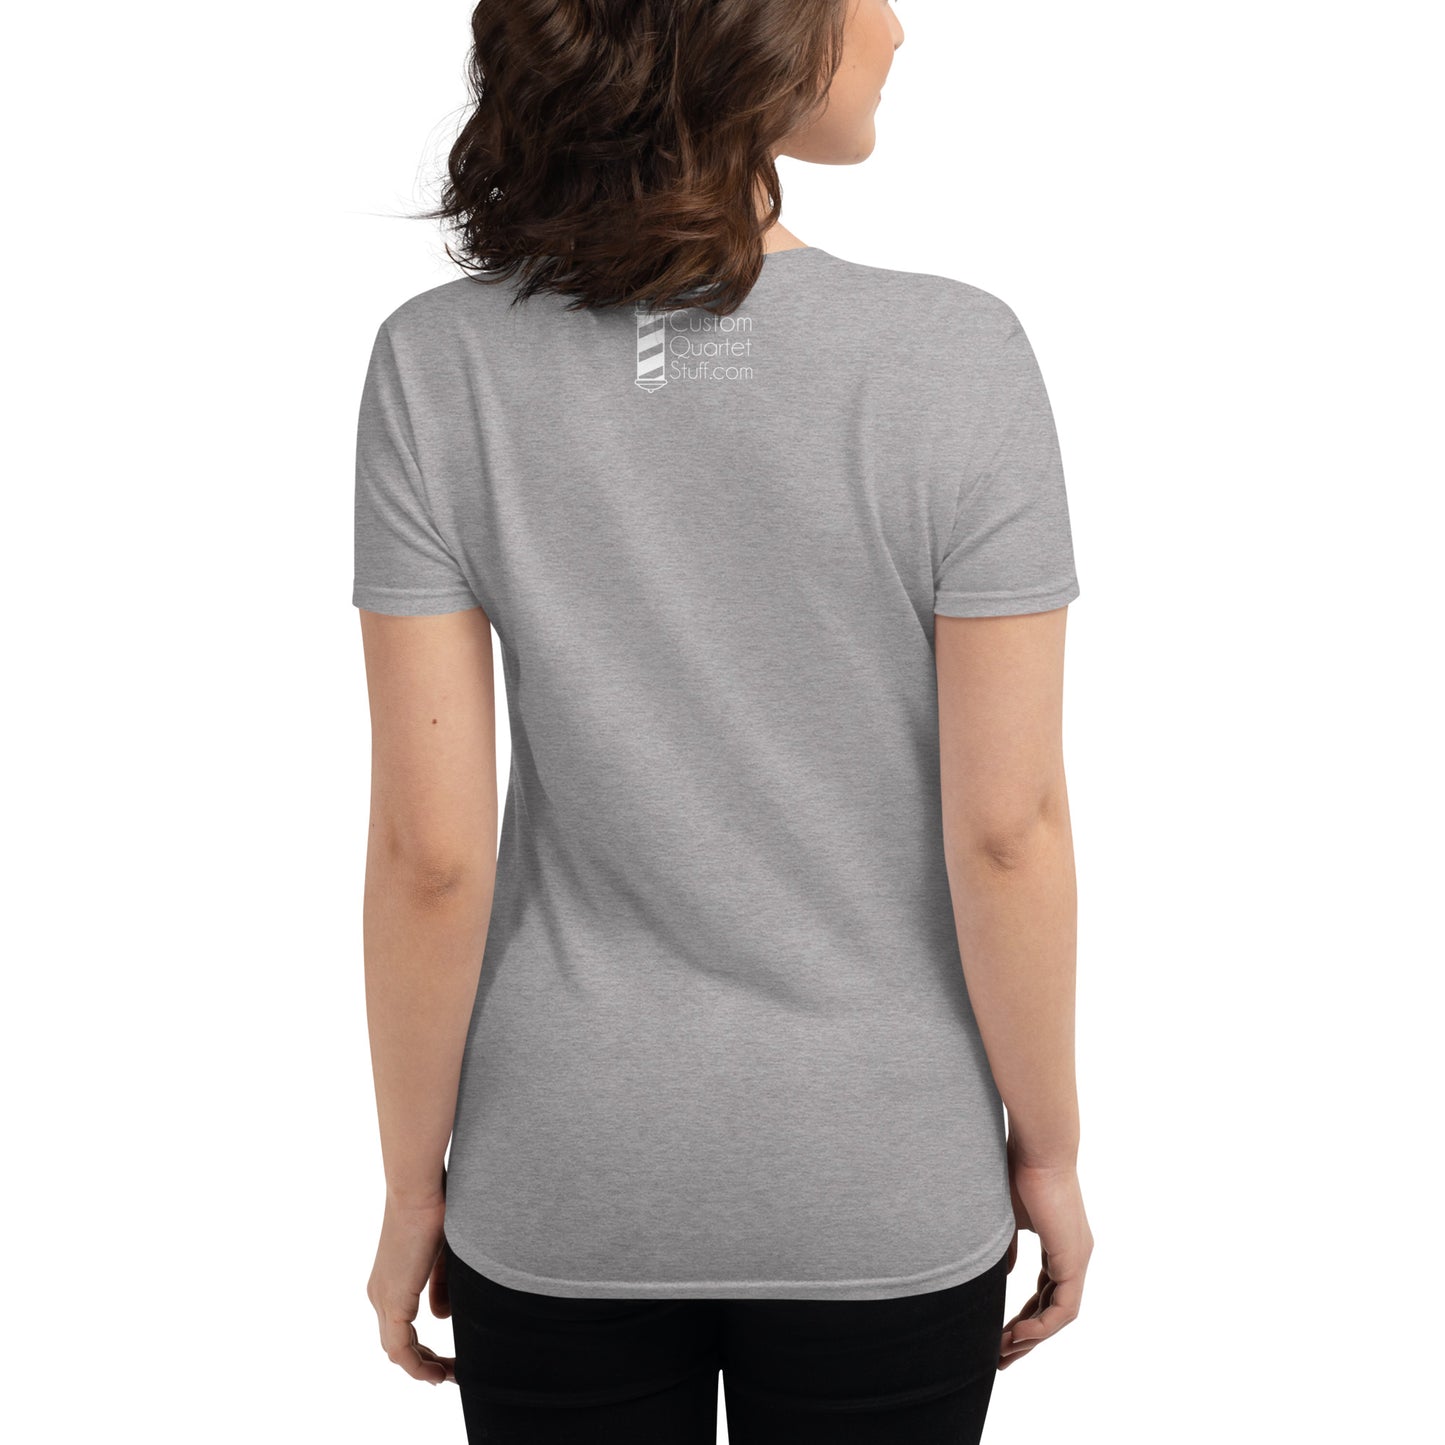 SHD Printed - Fitted Women's short sleeve t-shirt